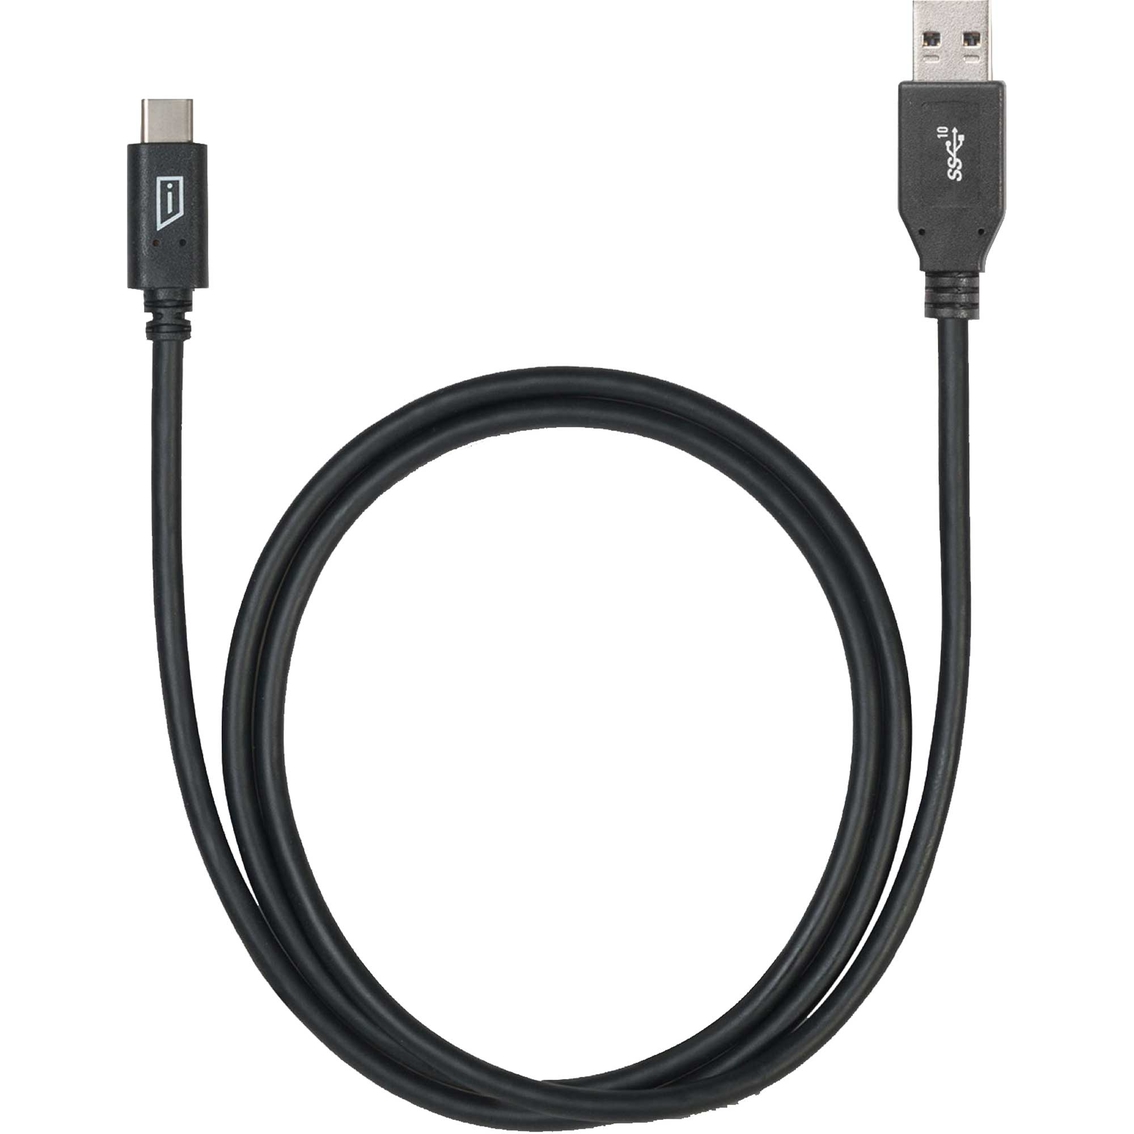 Targus iStore USB C to USB A Cable - Image 3 of 3